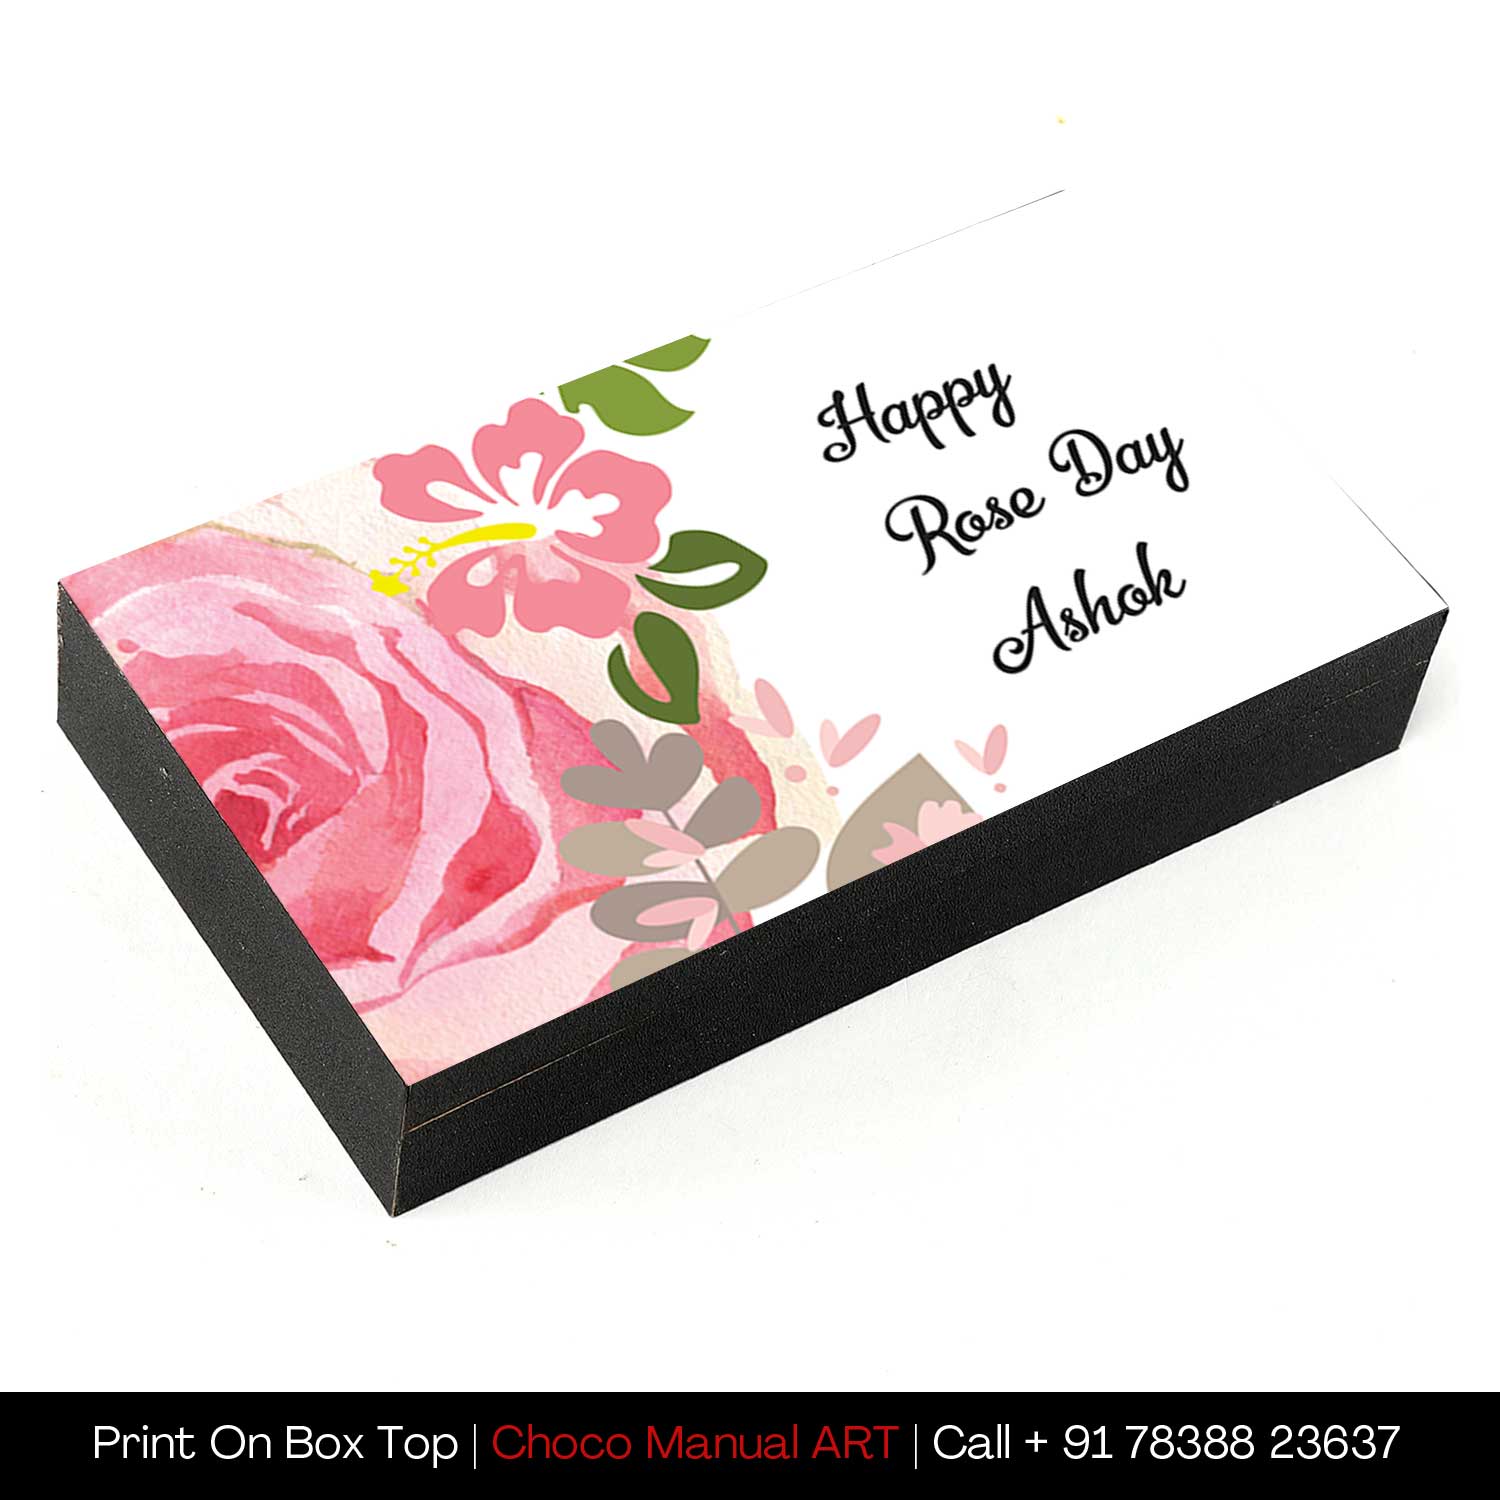 Rose Day Heart Shape chocolates Special gift